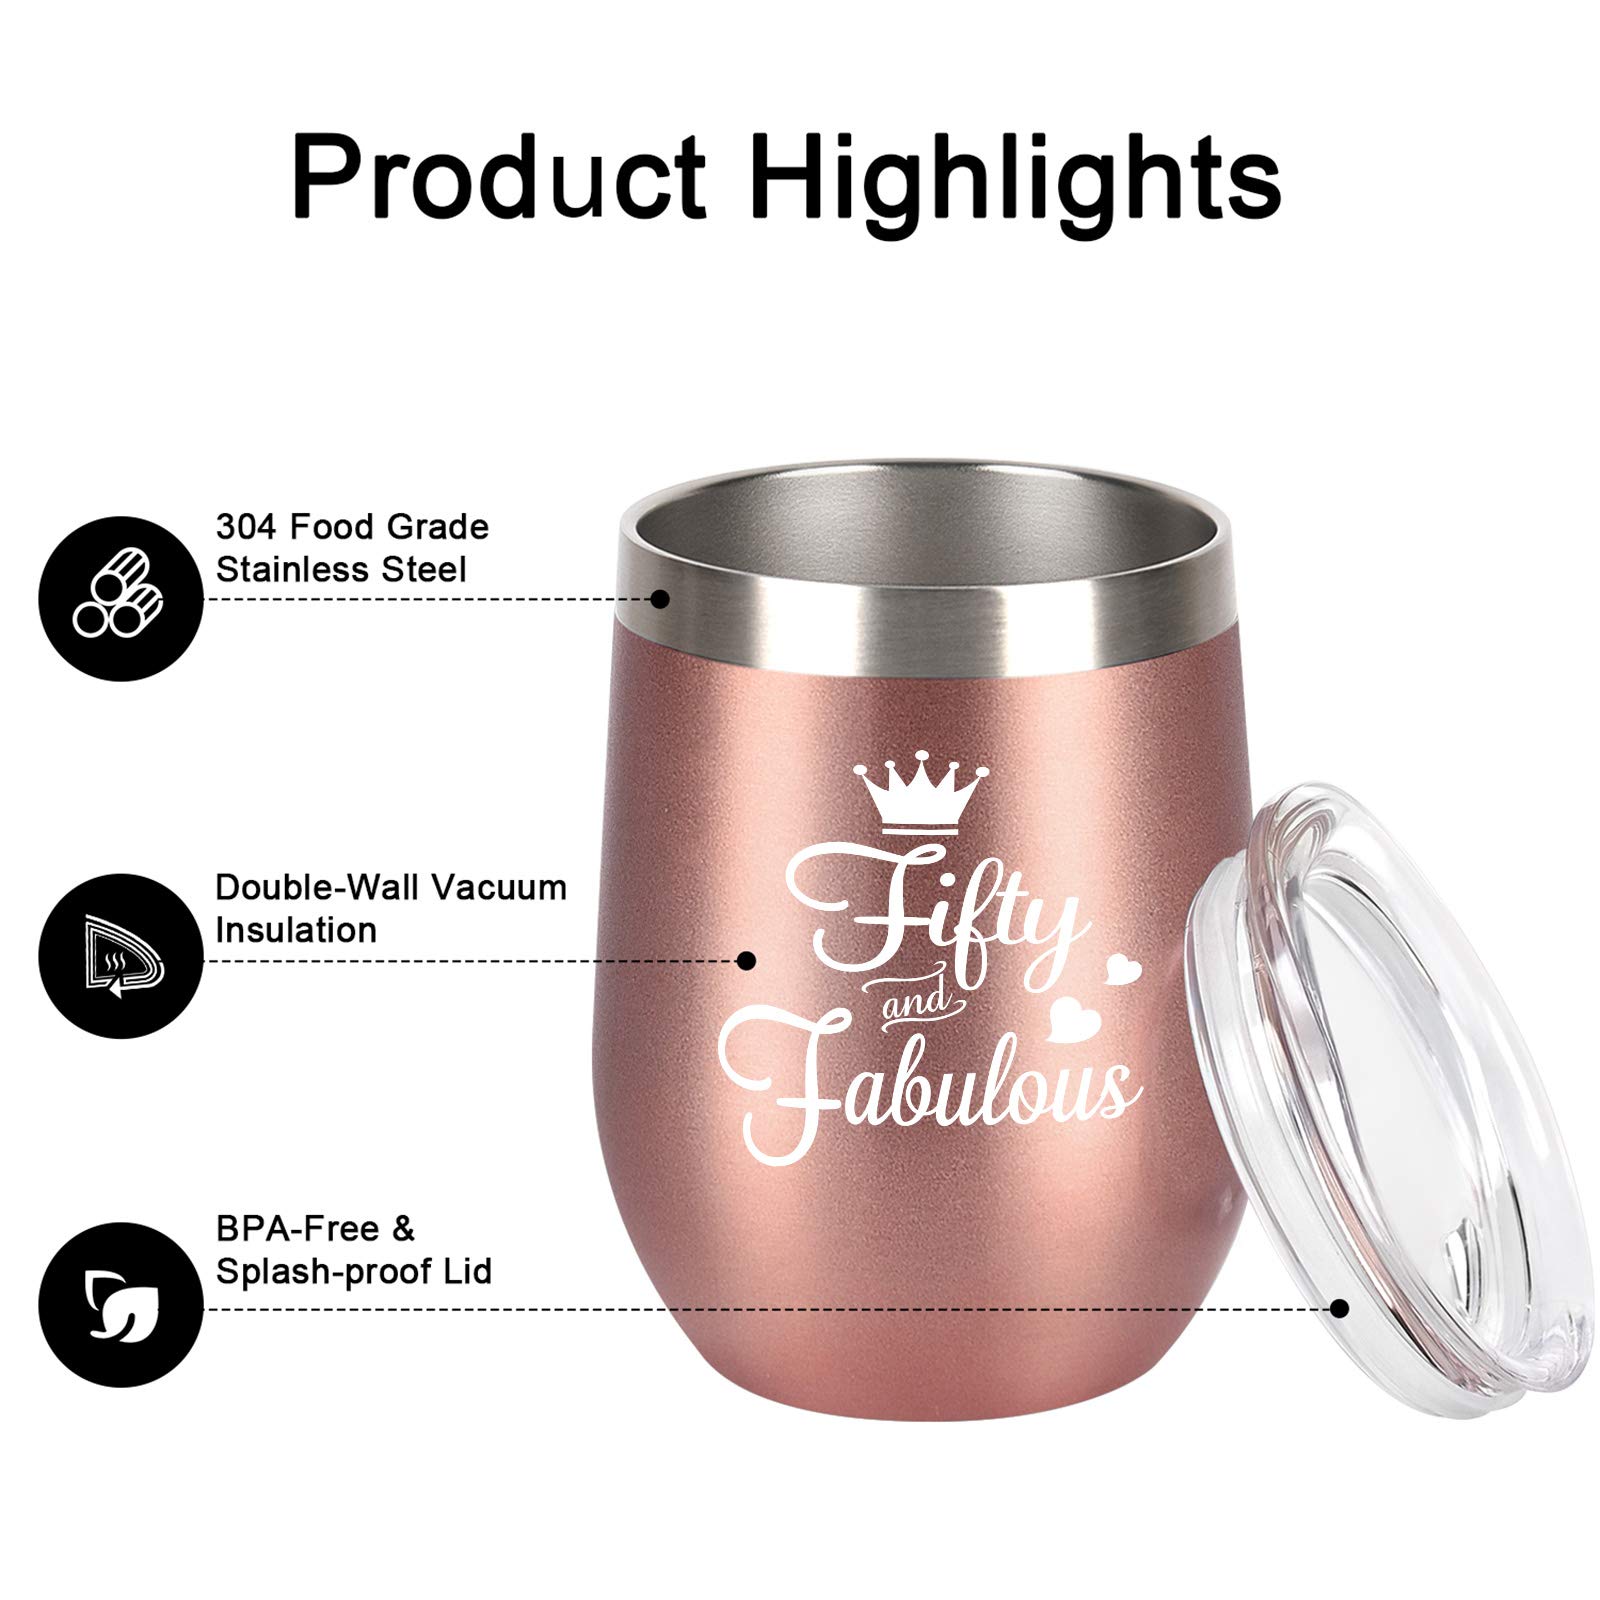 GINGPROUS 50th Birthday Gifts for Women Wife Mom Friends Coworkers, Fifty and Fabulous Wine Tumbler for 50th Birthday, 12 Oz Stainless Steel Insulated Wine Tumbler with Lid and Straw, Rose Gold